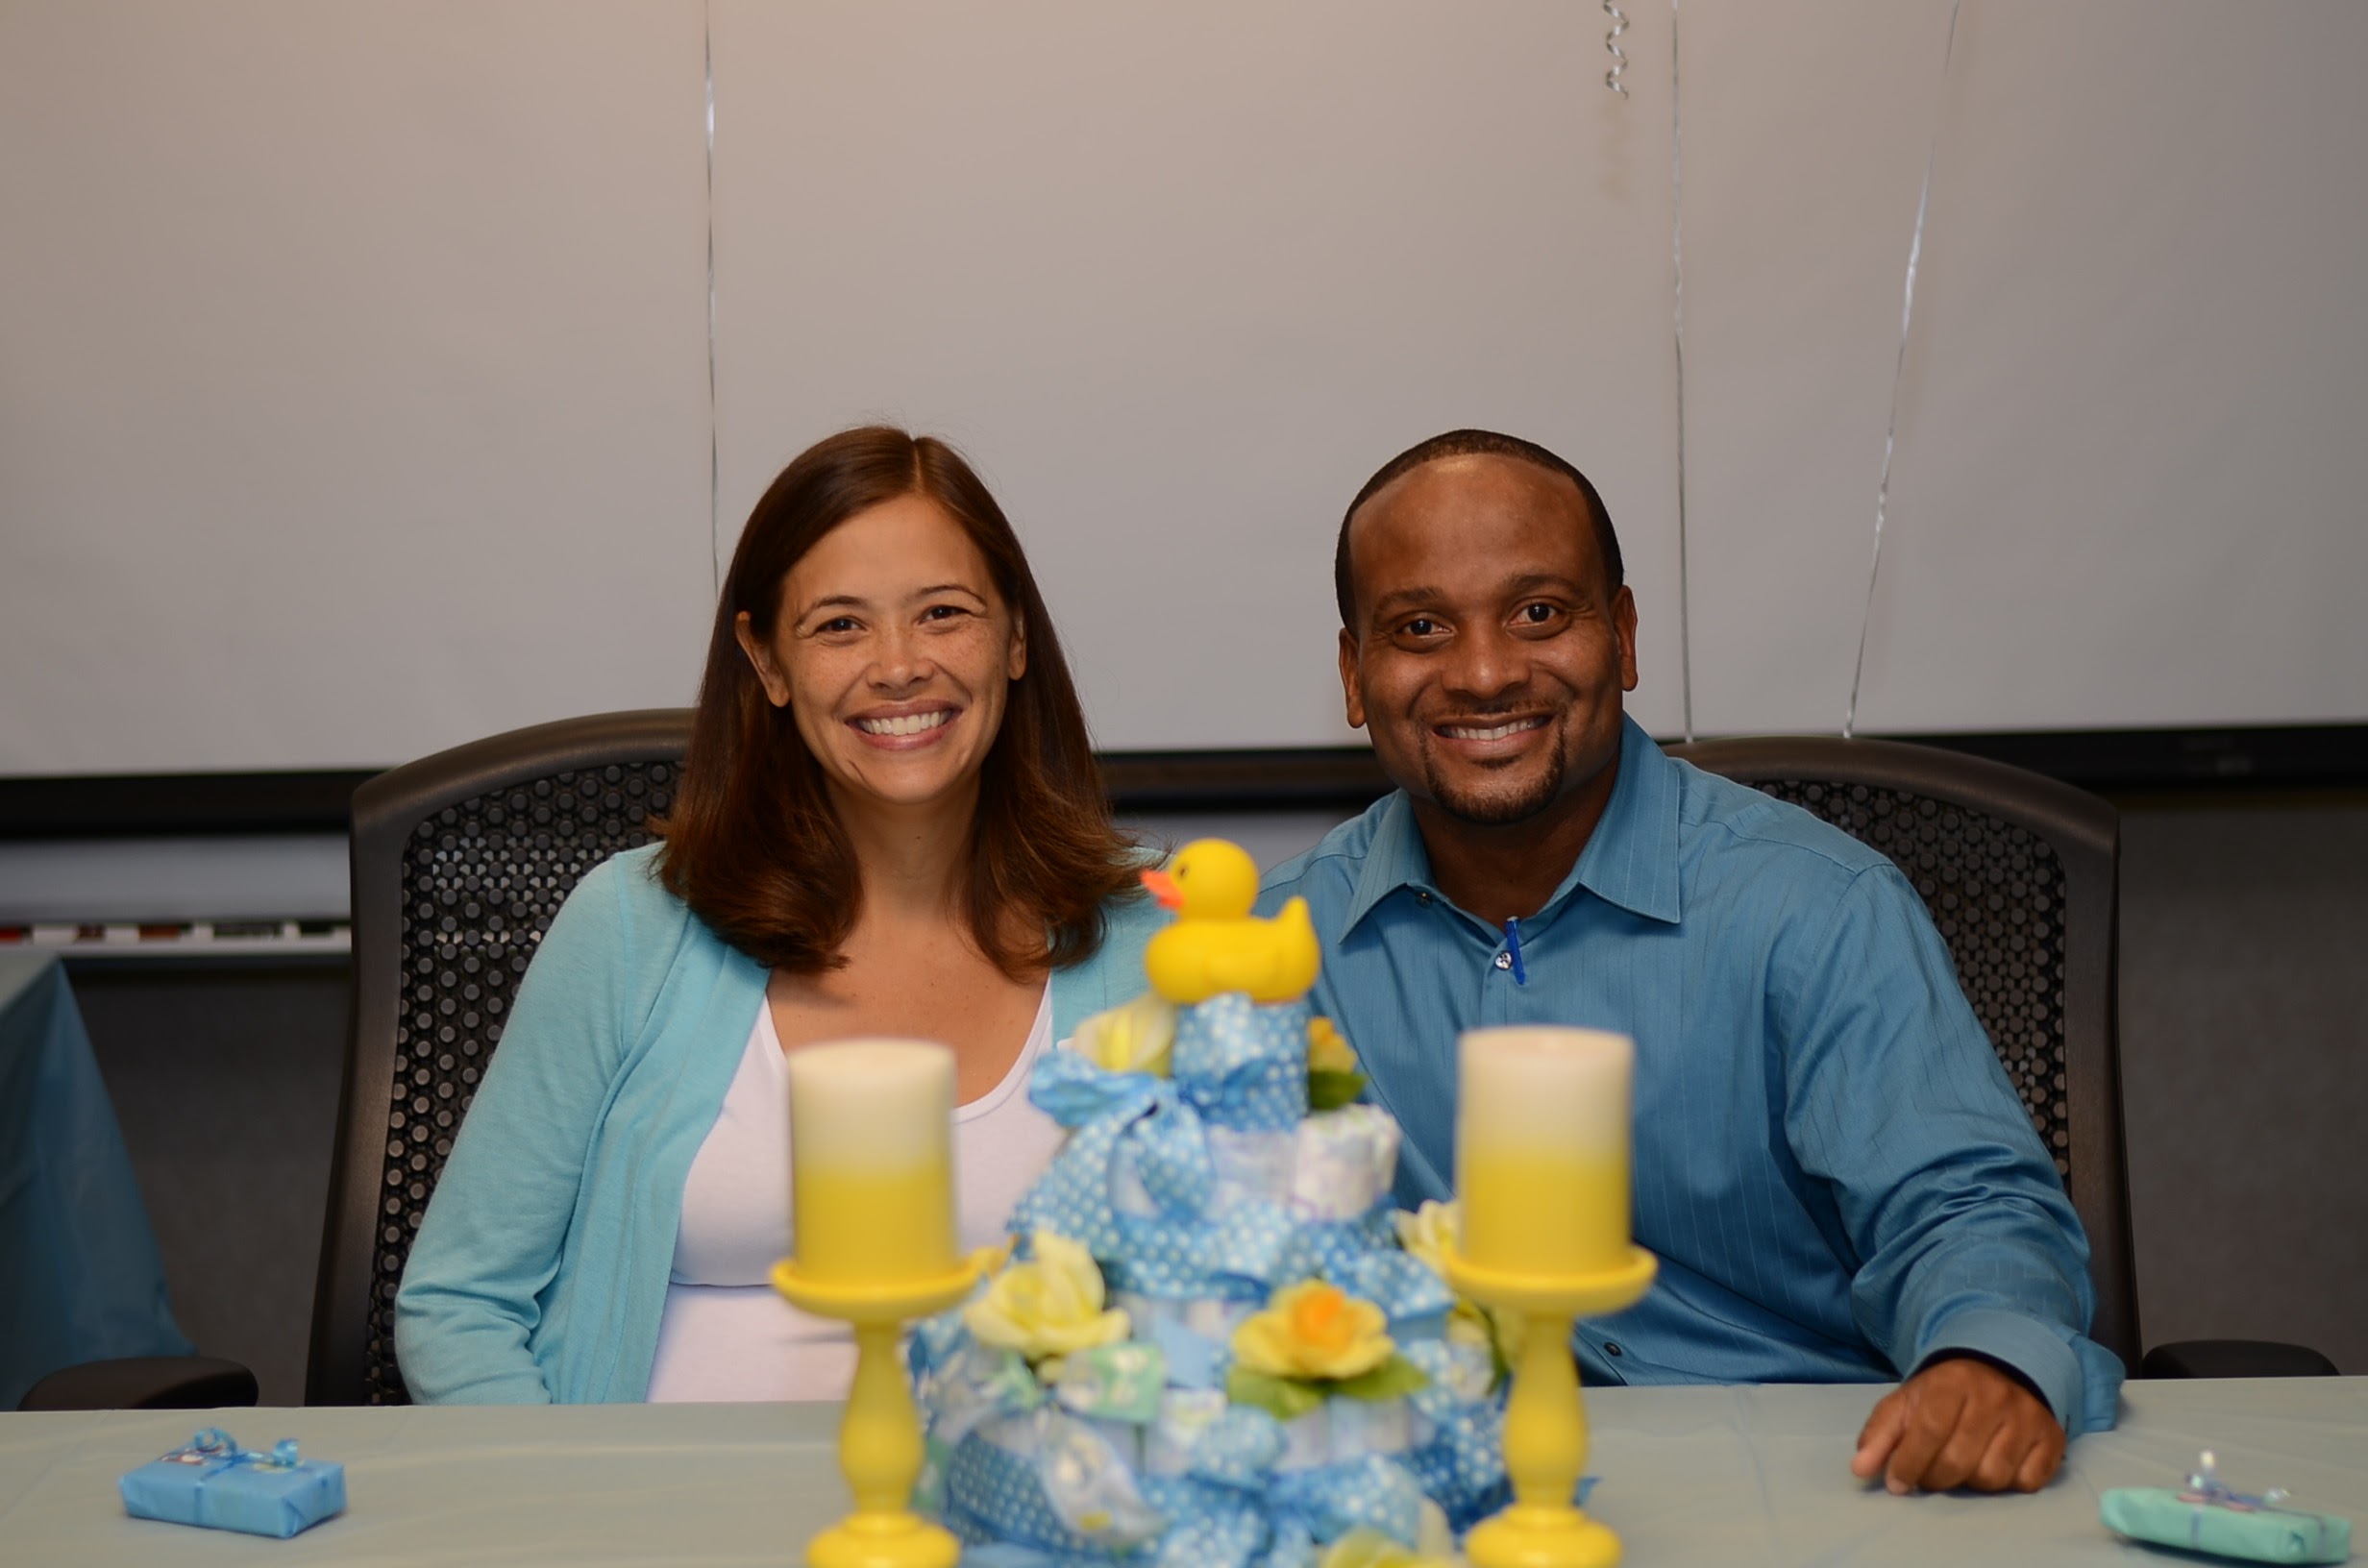 Andre and Jessica from North Carolina, United States